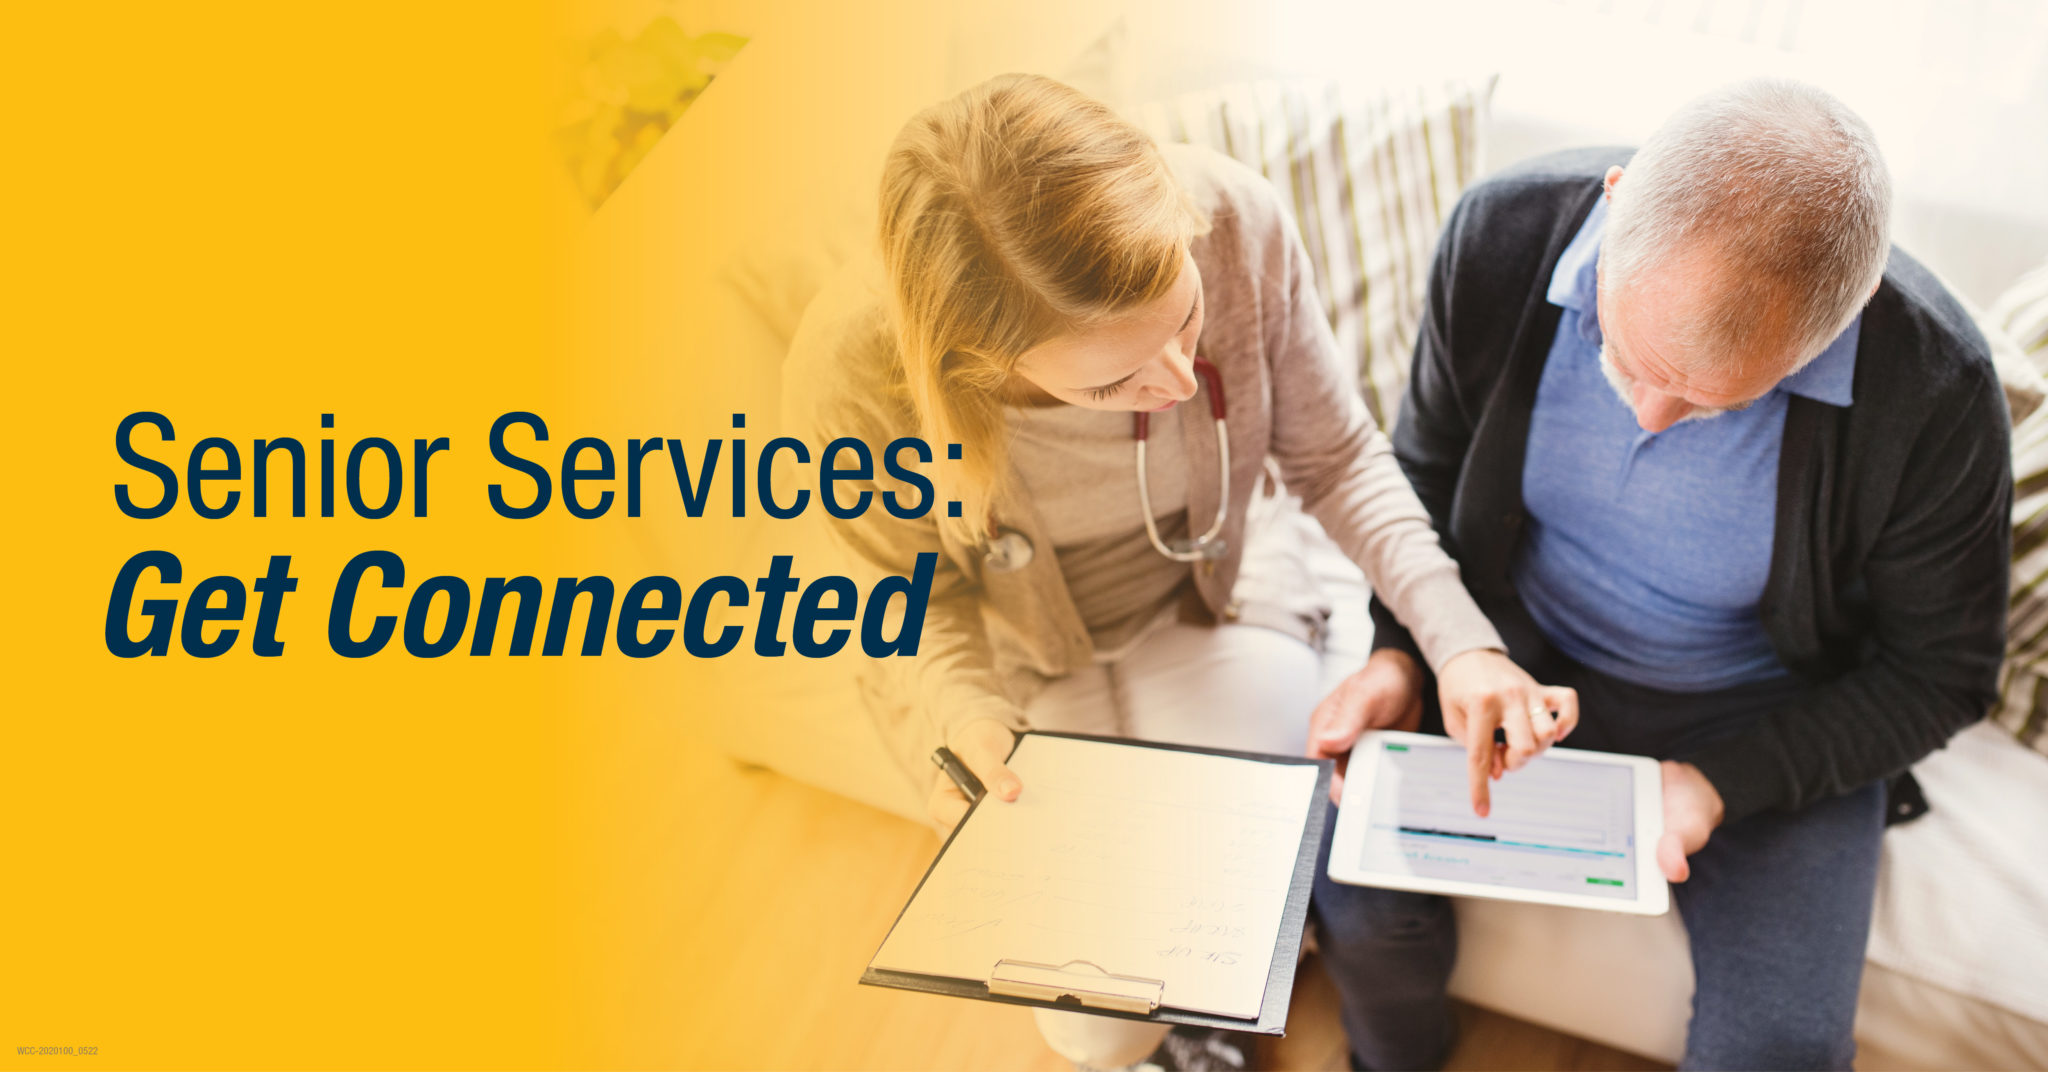 Senior Services: Get Connected